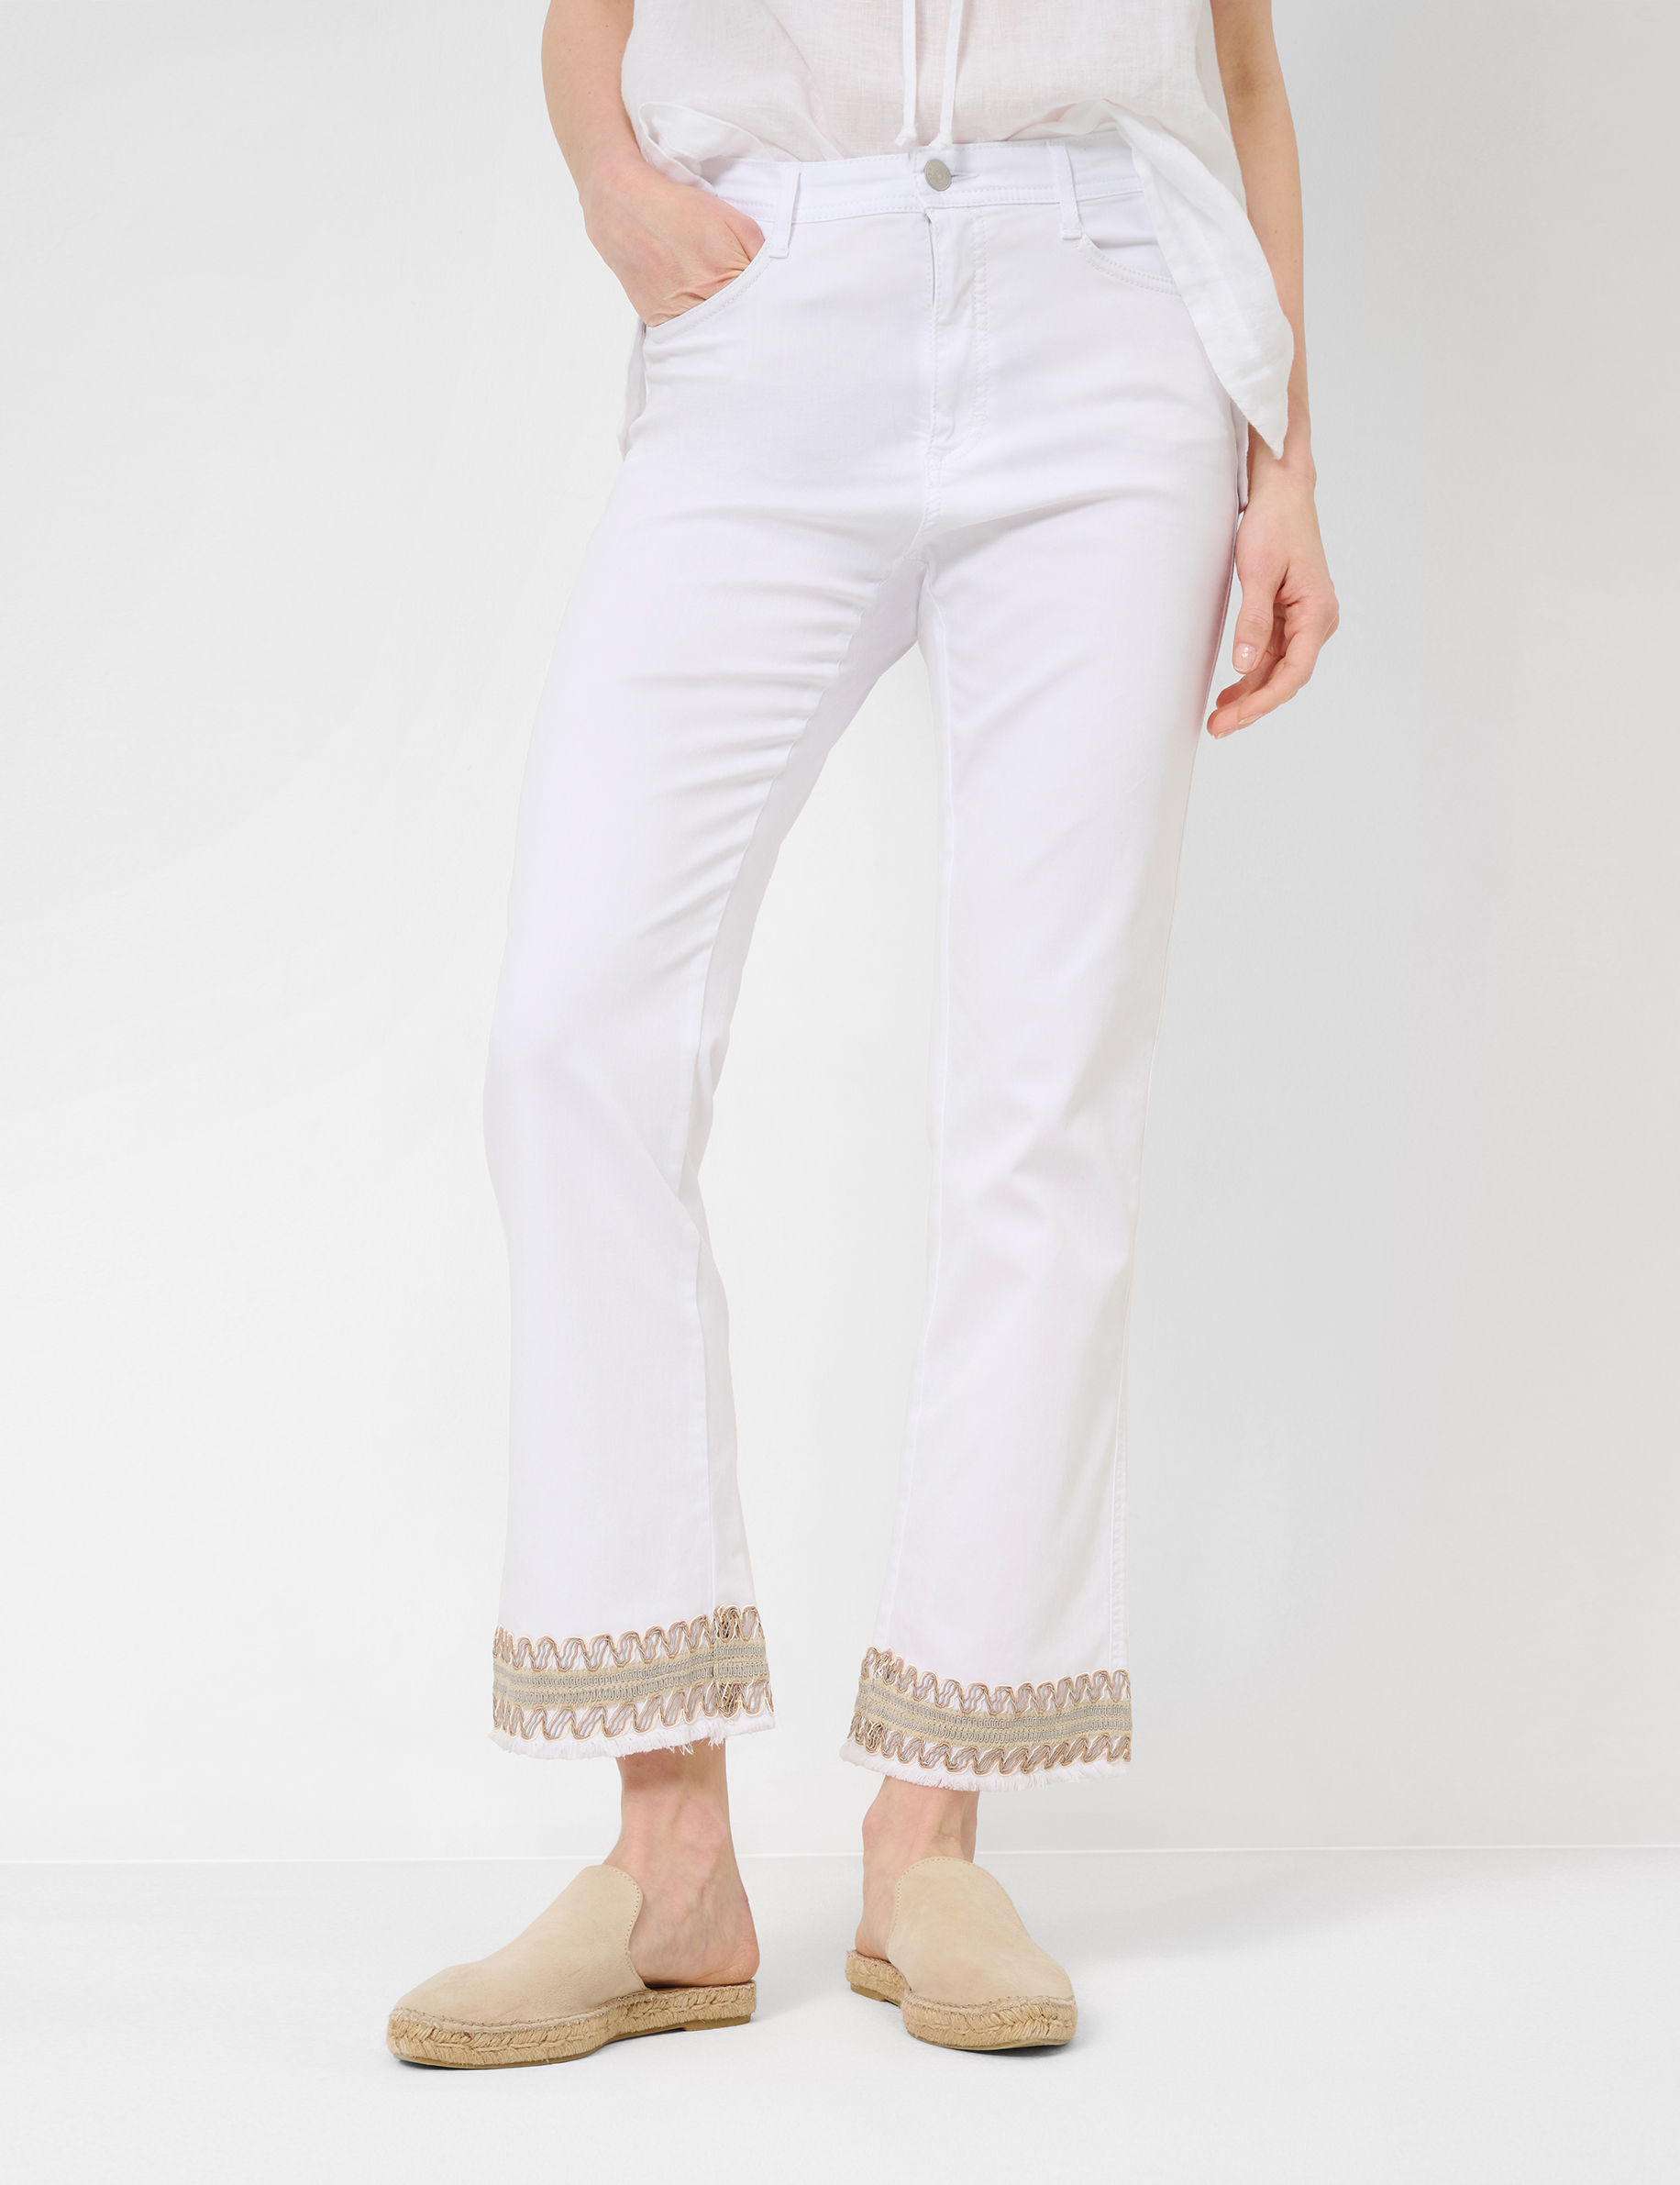 Shades of White, Women, REGULAR BOOTCUT, Style MARY S, MODEL_FRONT_ISHOP